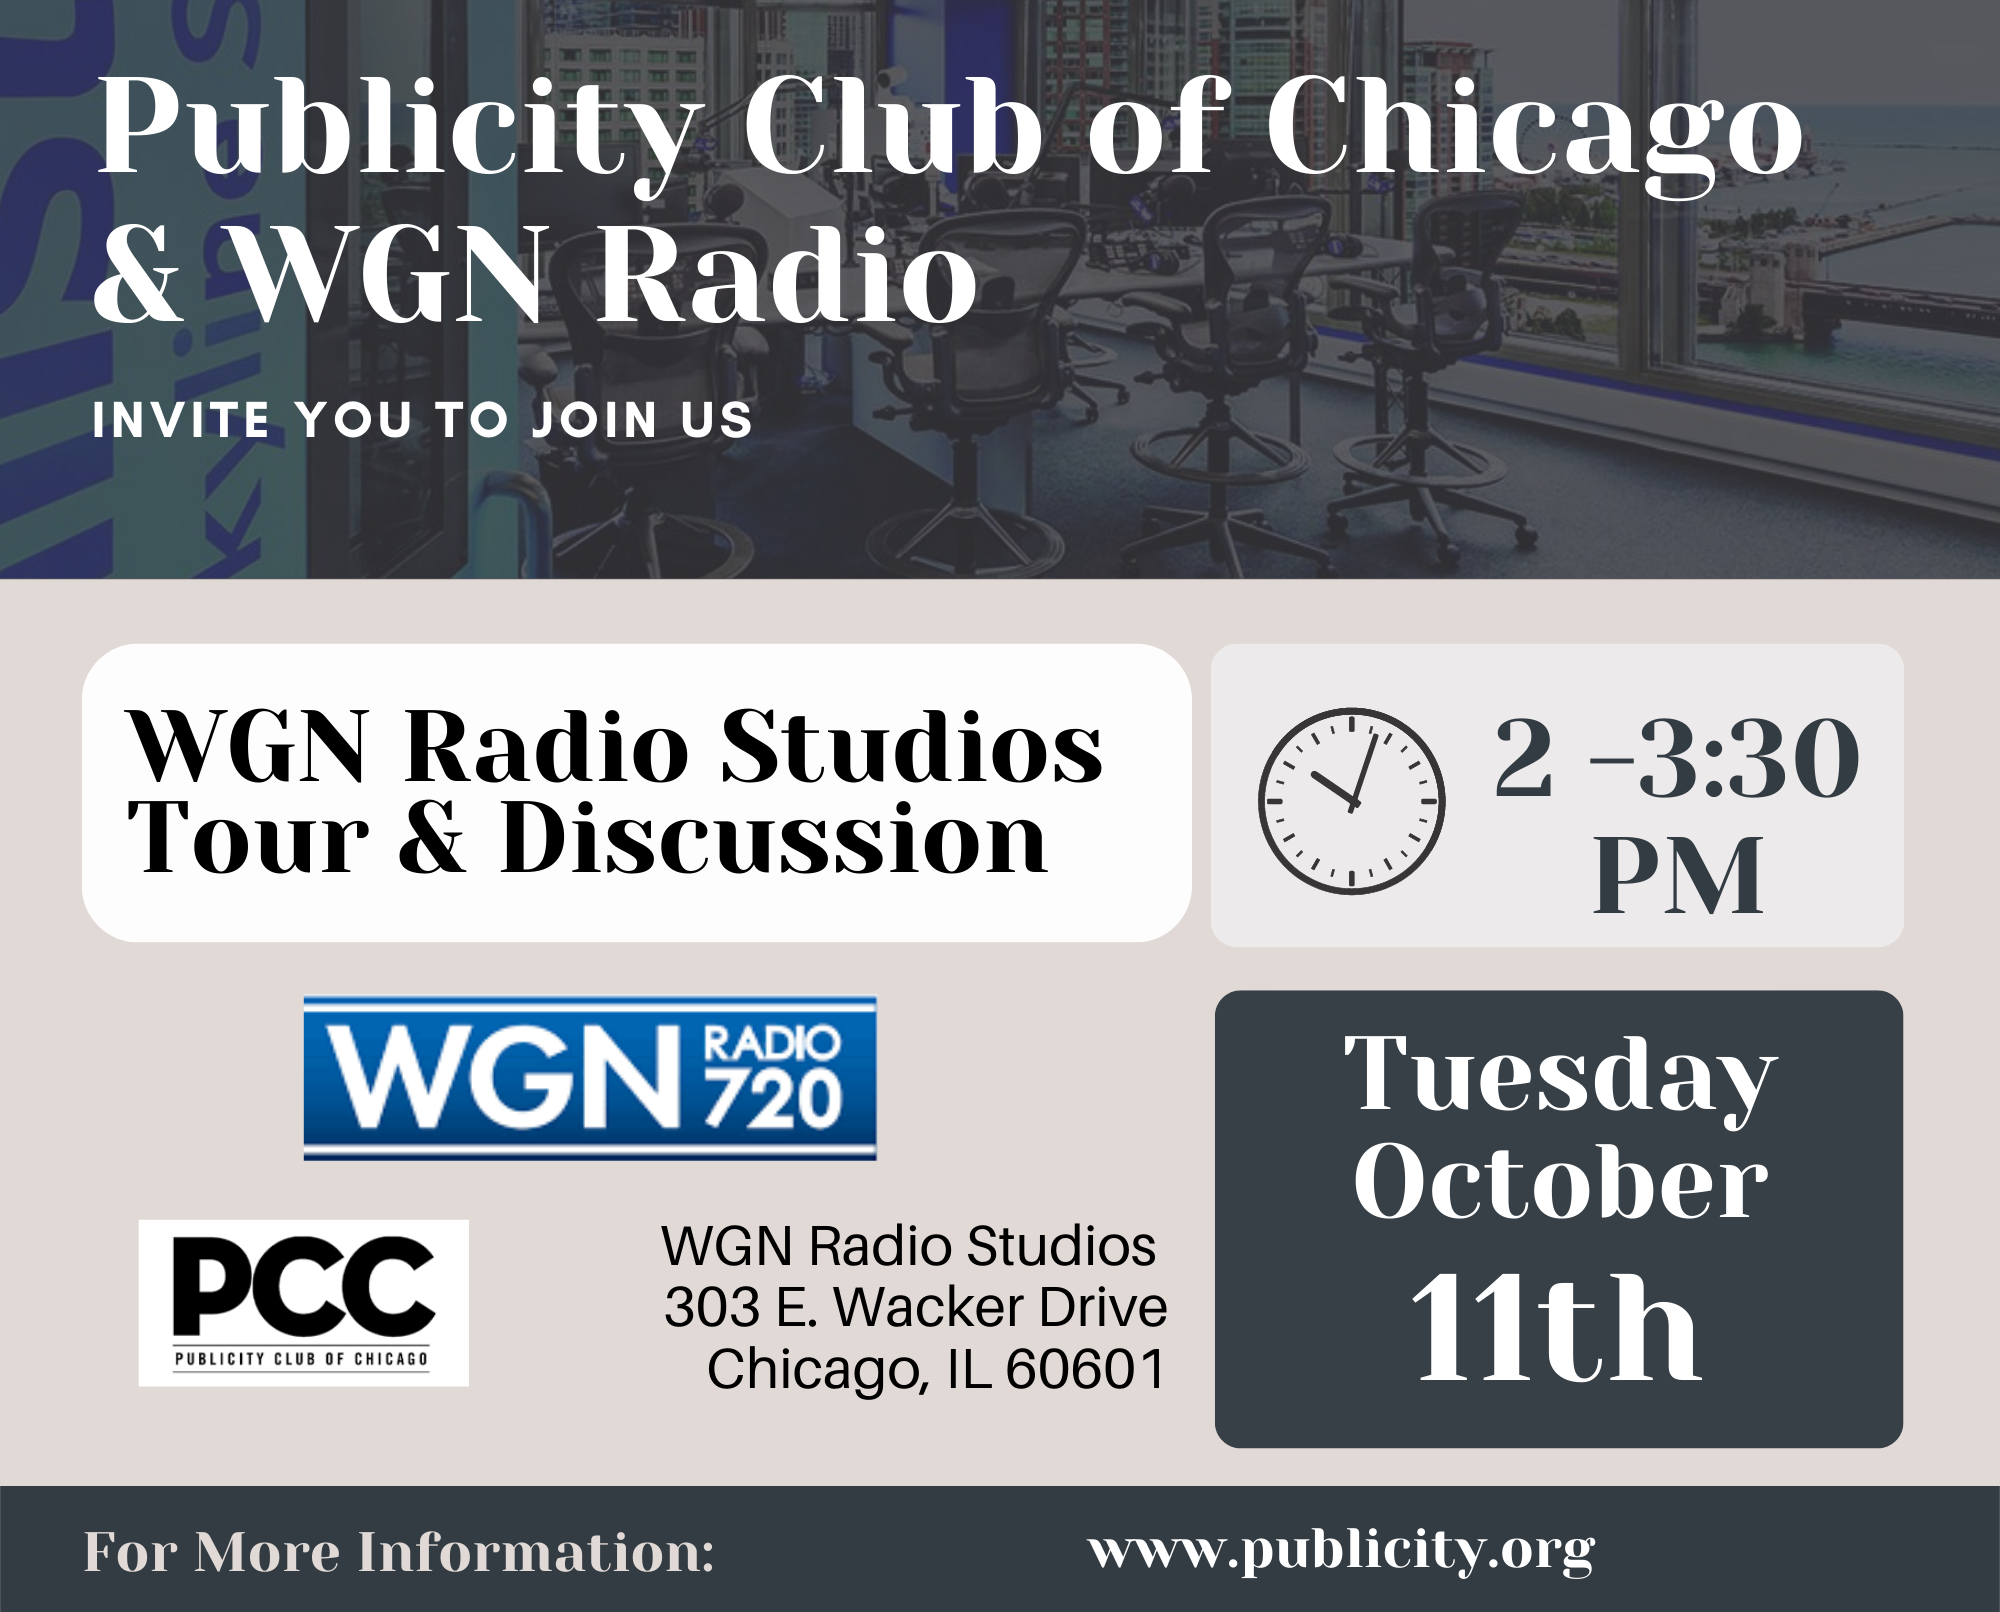 PCC Members Able to Sign Up for WGN Radio Studios Tour